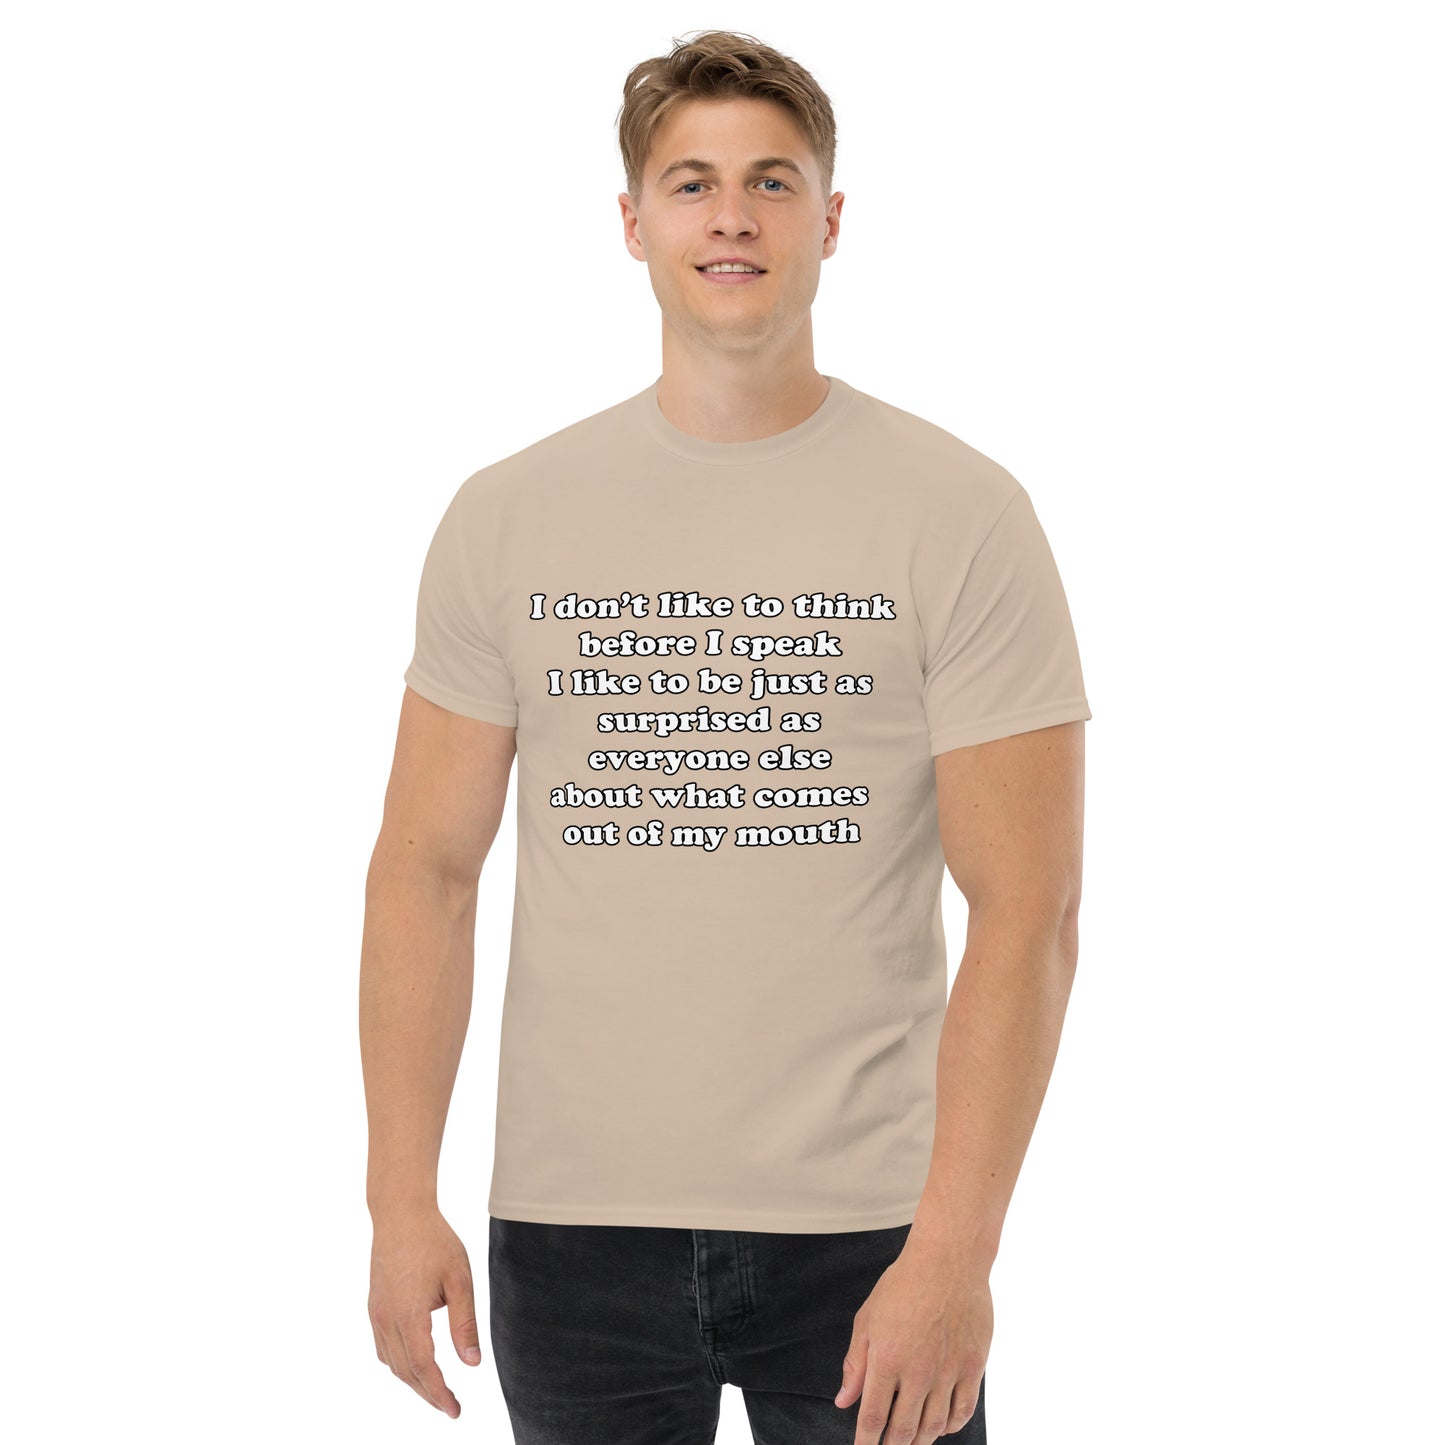 Man with sand t-shirt with text “I don't think before I speak Just as serprised as everyone about what comes out of my mouth"